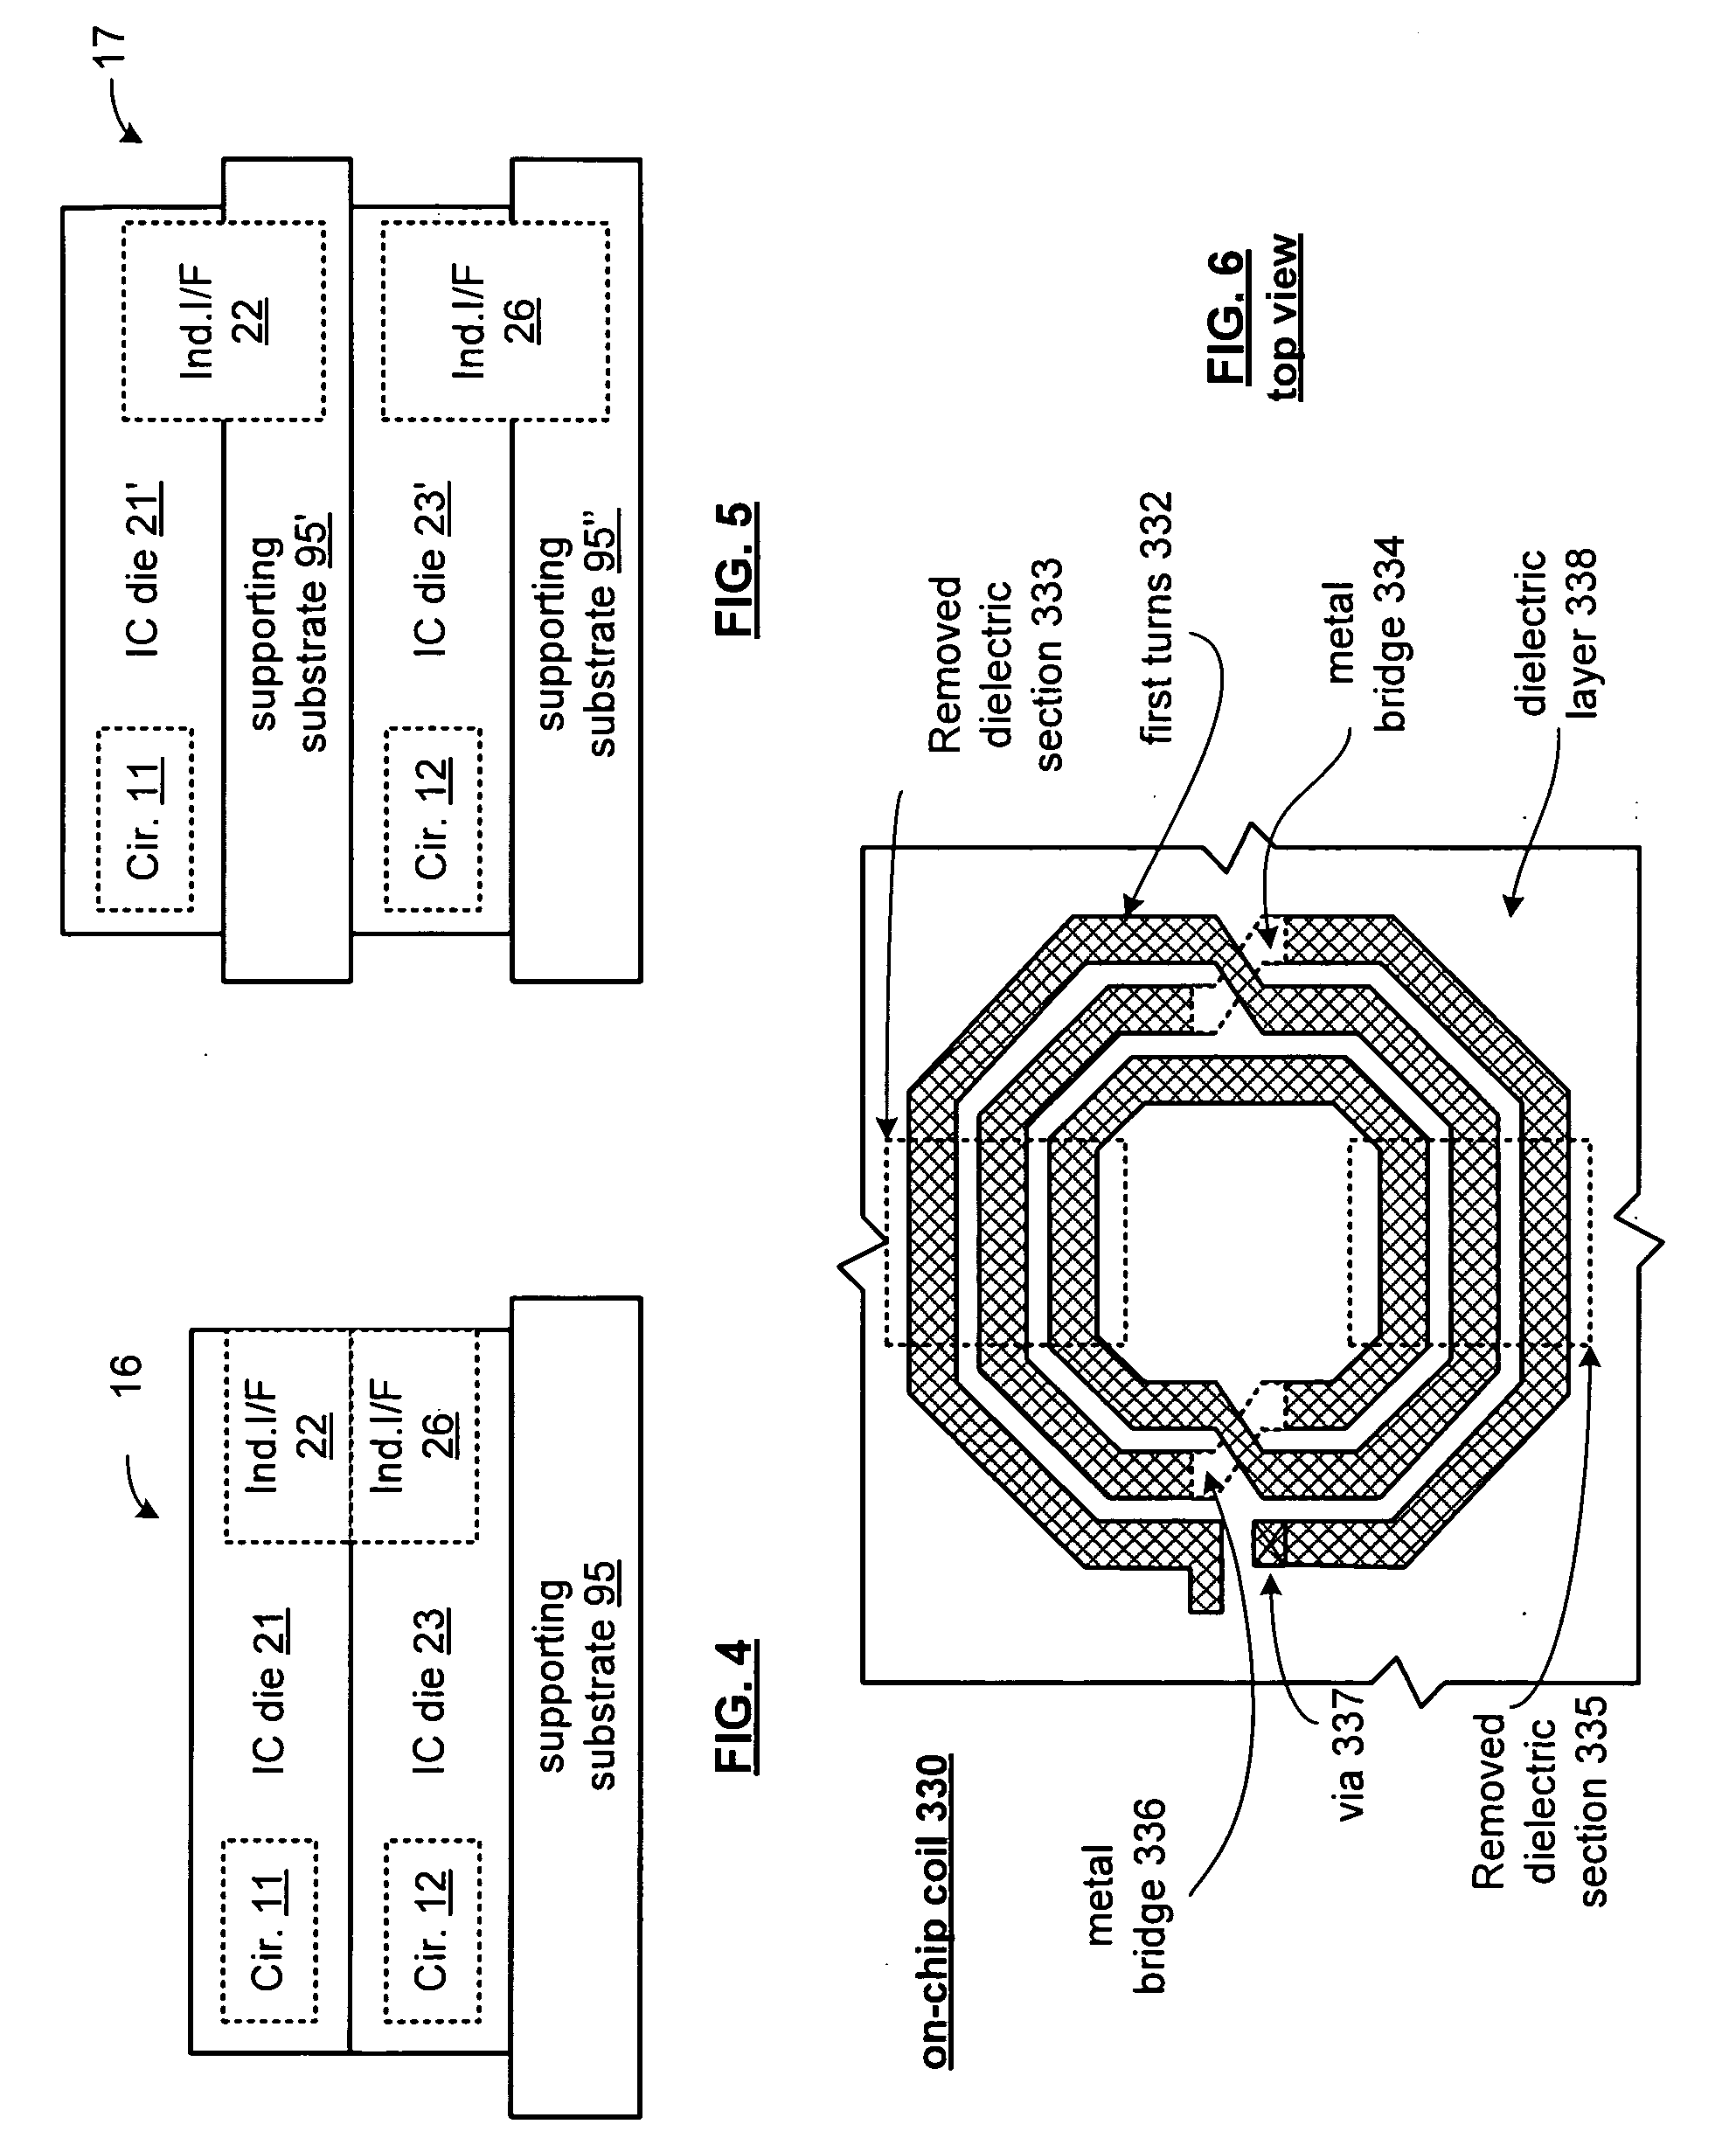 Inductively coupled integrated circuit with near field communication and methods for use therewith